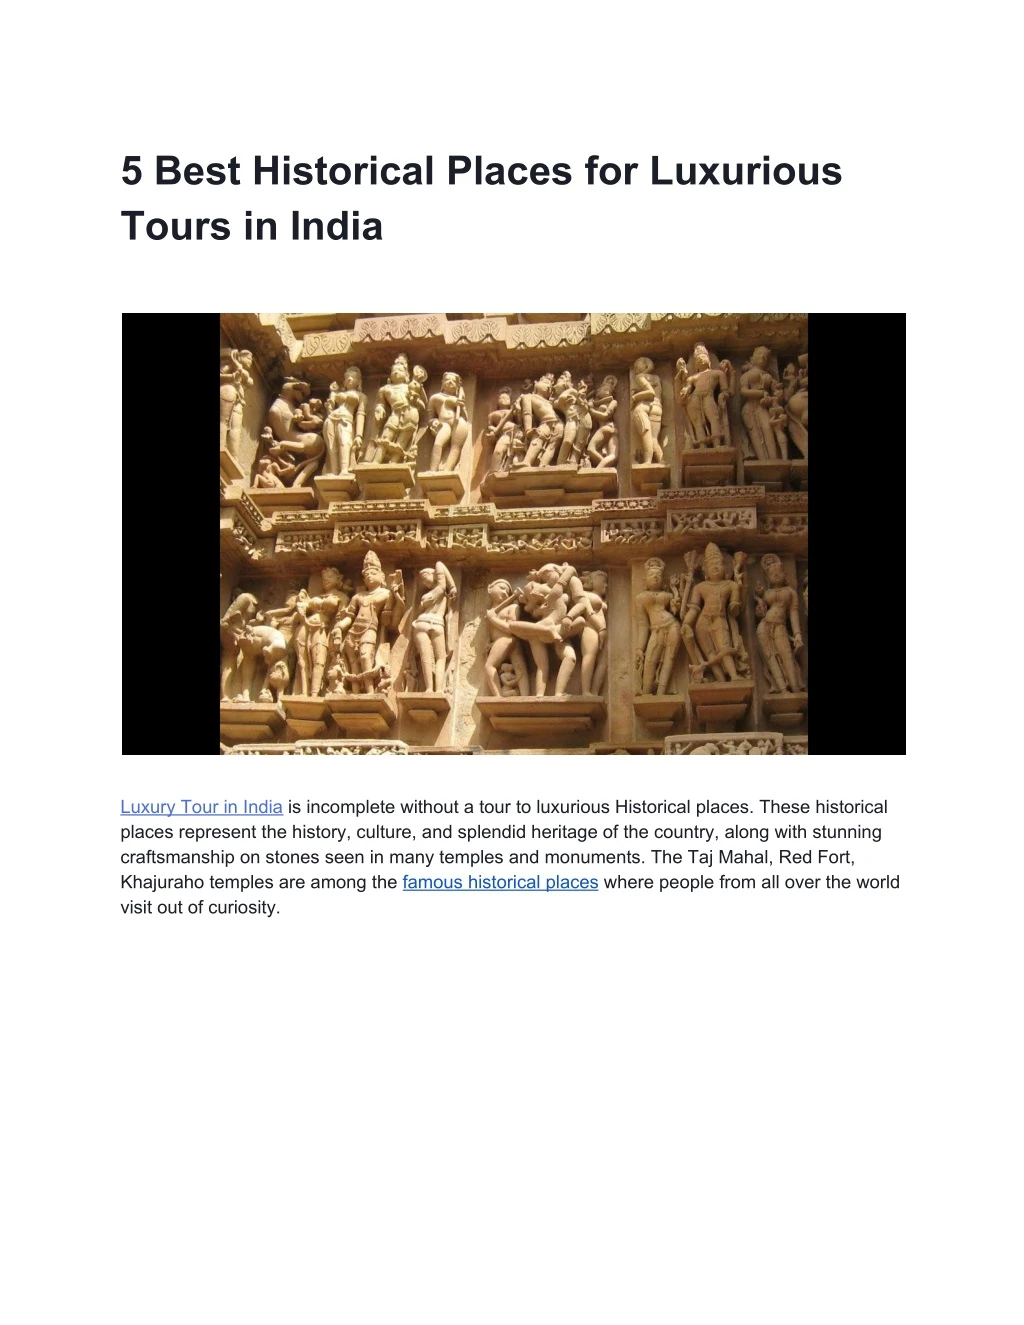 5 best historical places for luxurious tours